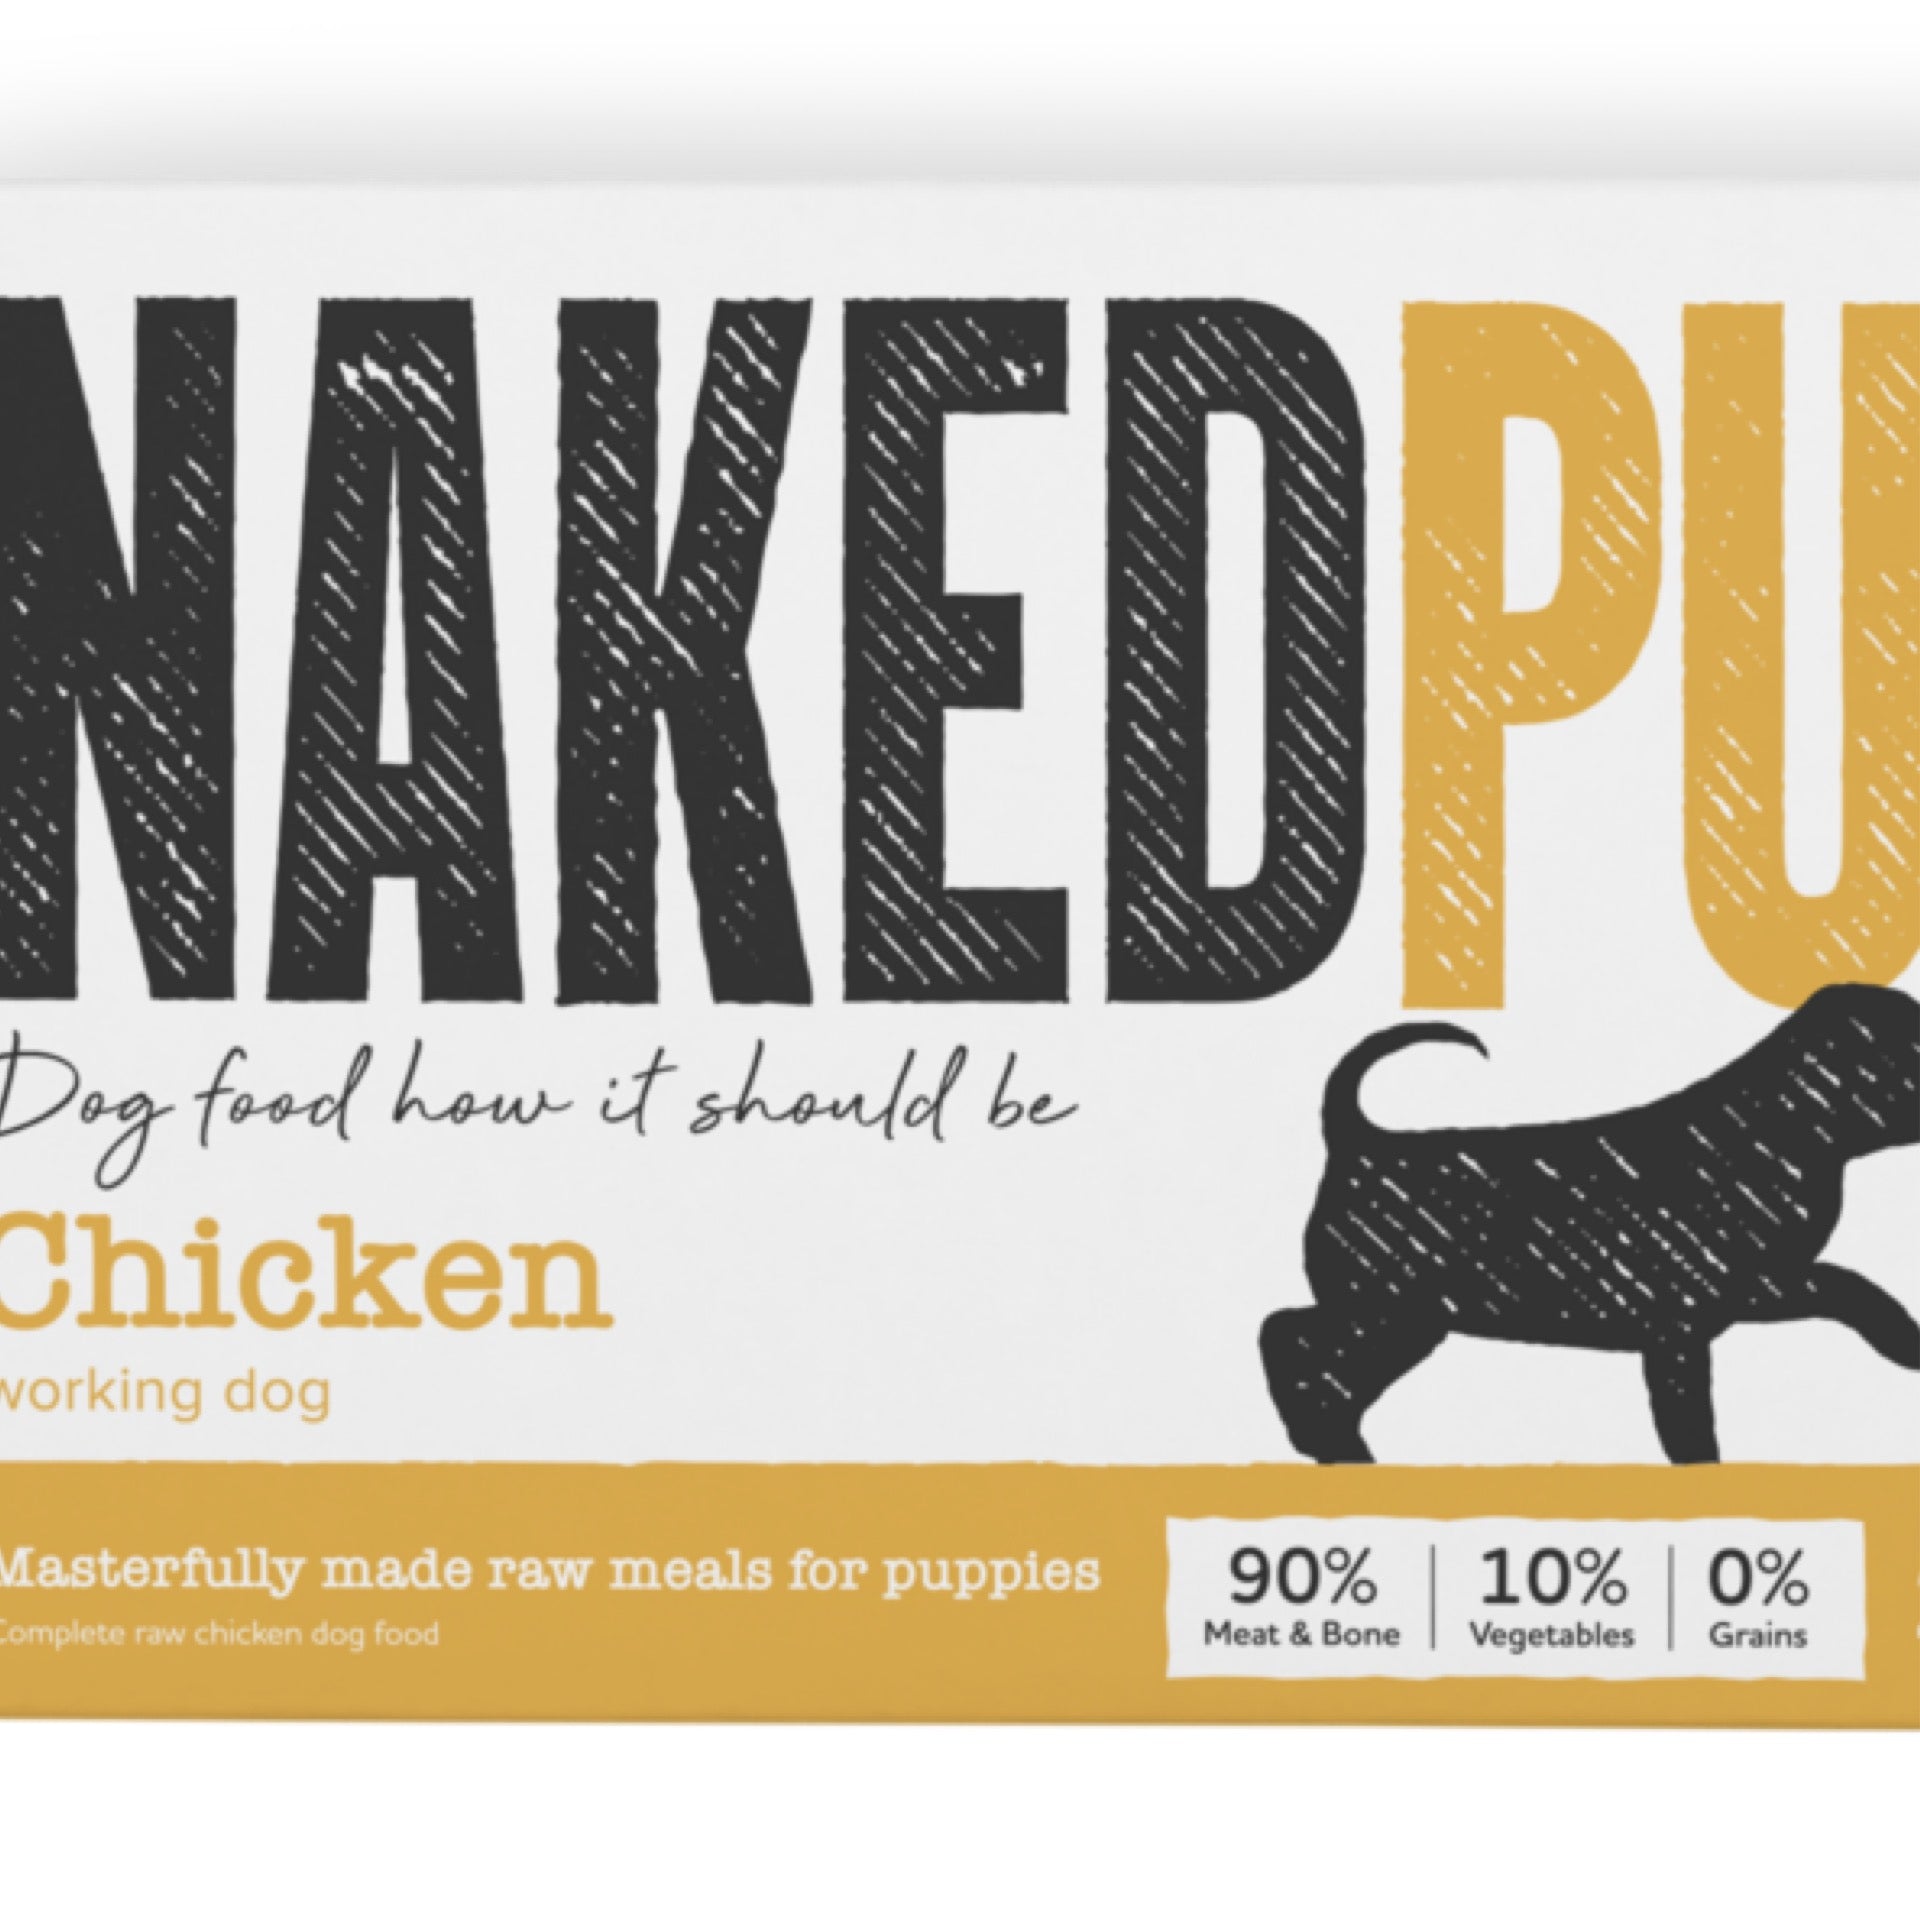 Naked Pup Chicken 2 x 500g